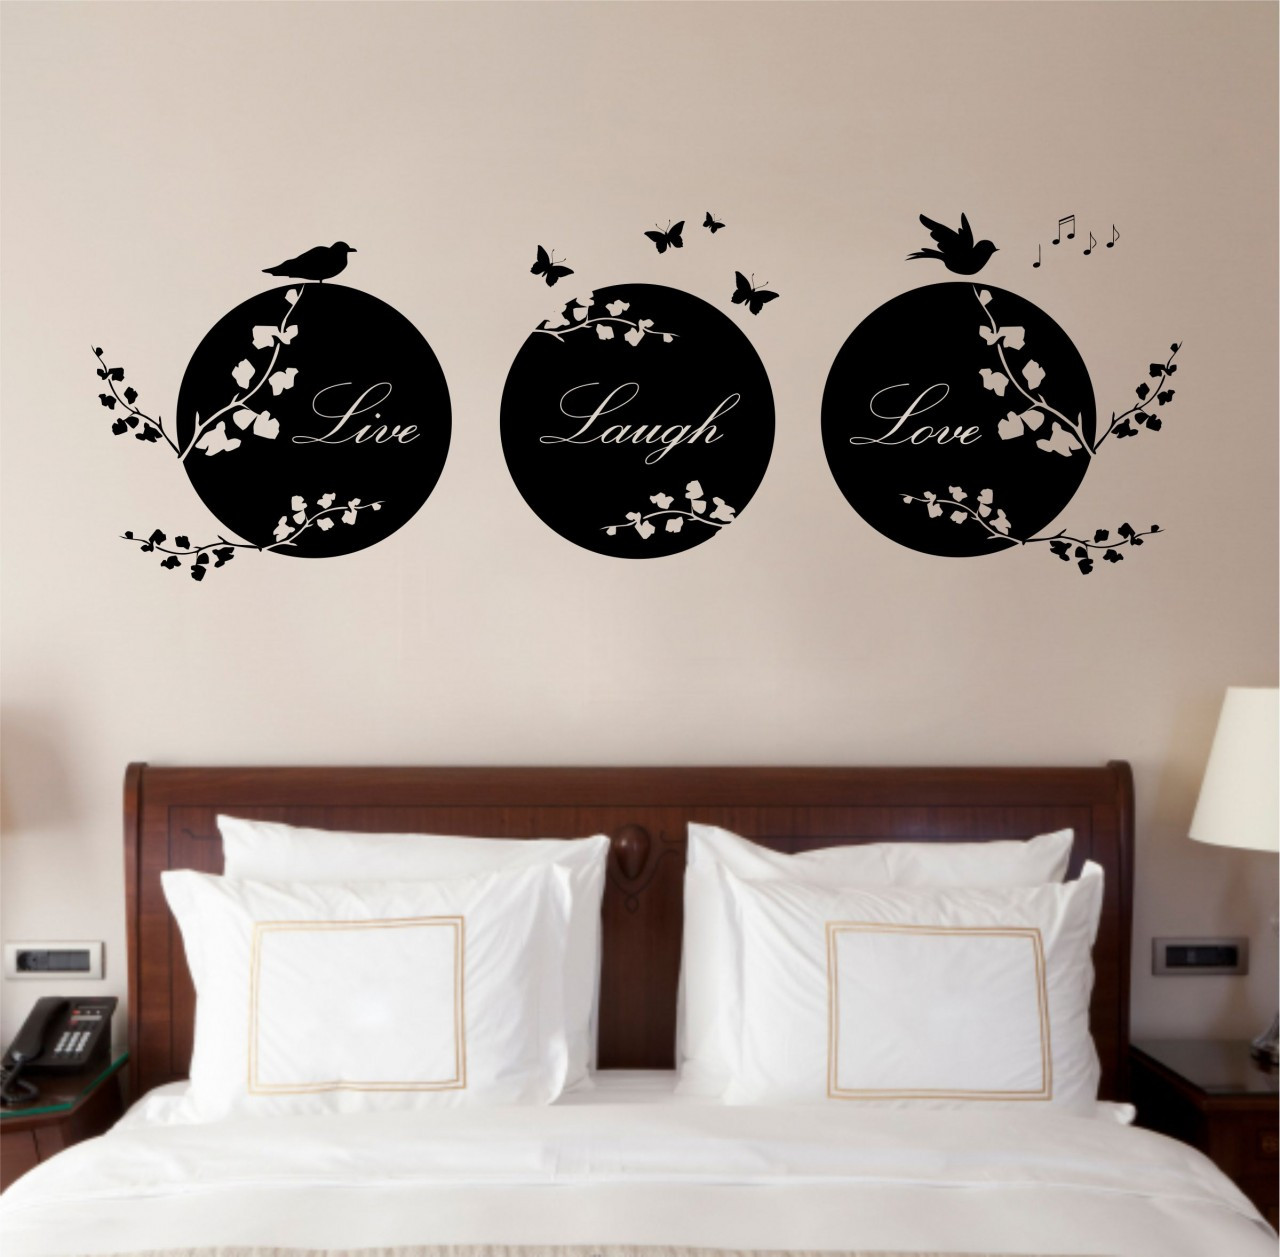 Wall Art Decals For Bedroom
 5 Types Wall Art Stickers To Beautify The Room